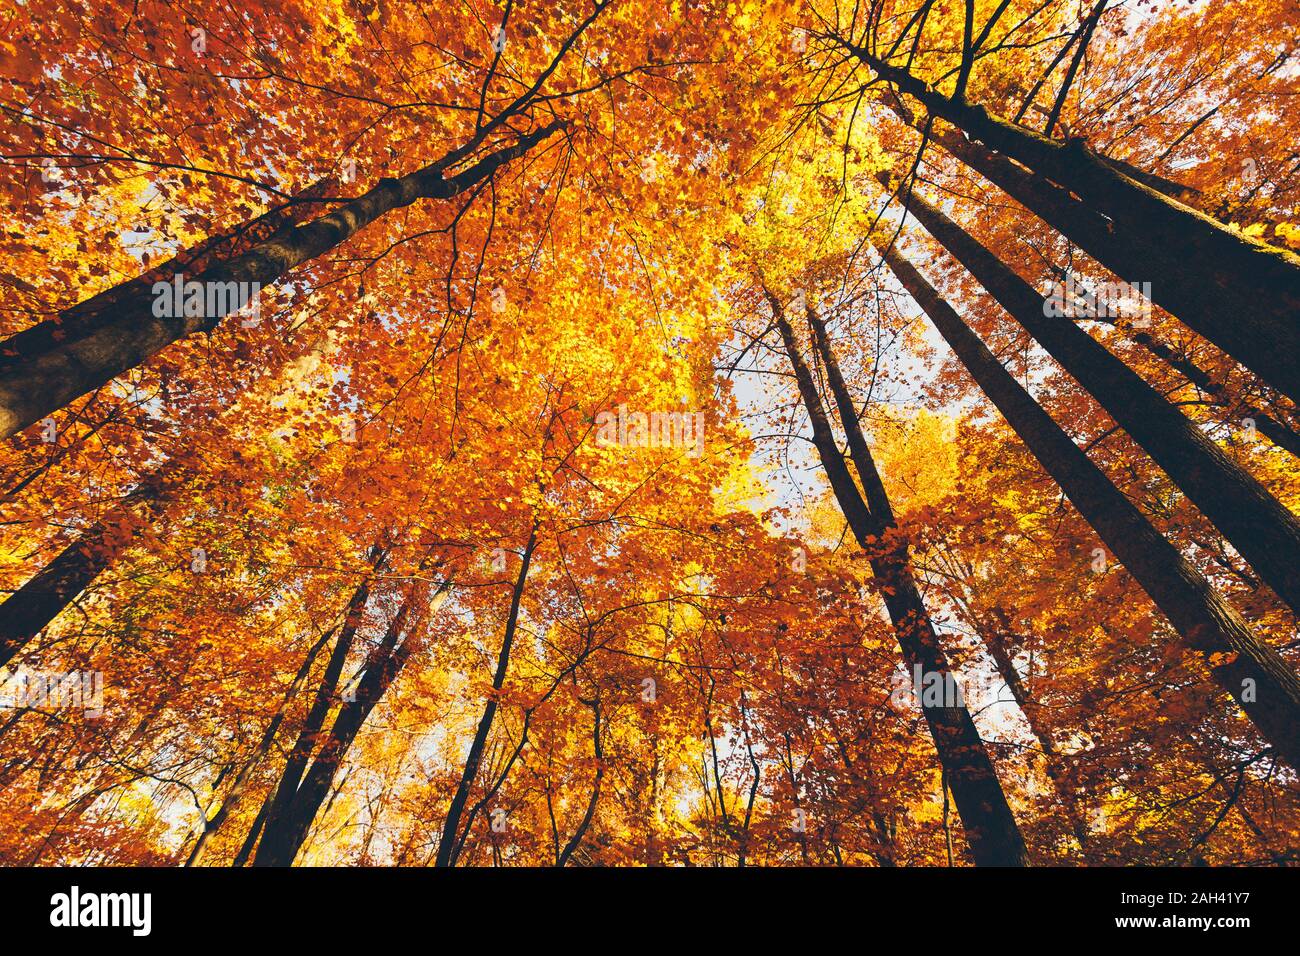 USA, Tennessee, Canopies of yellow forest trees in autumn Stock Photo